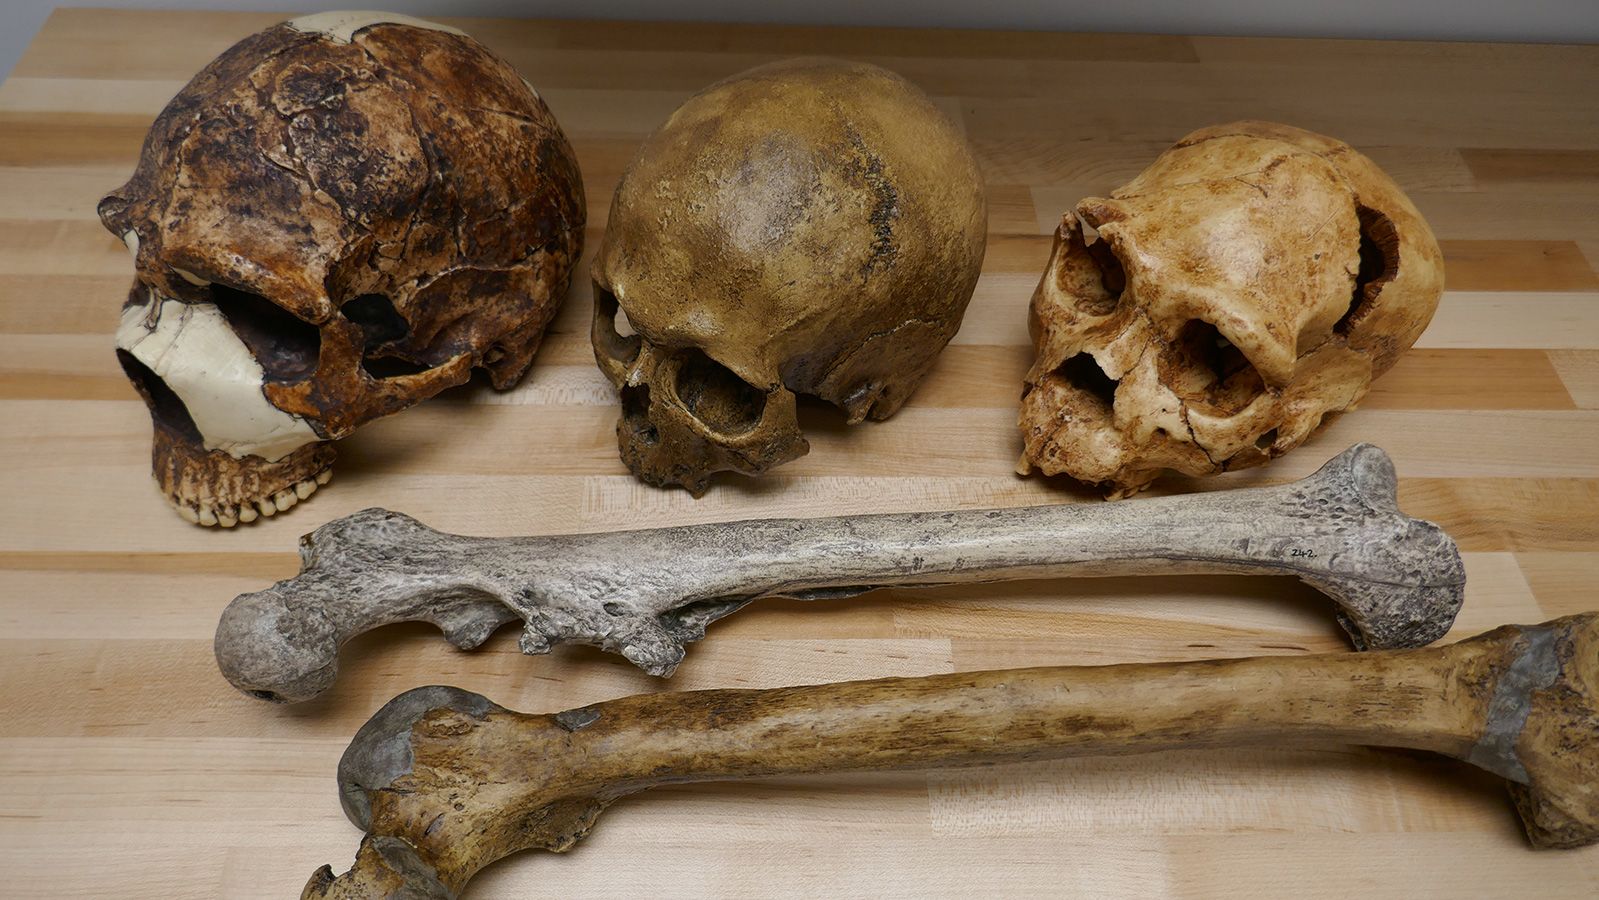 Human fossils illustrating the variation in brain (skulls) and body size (thigh bones) during the Pleistocene period.